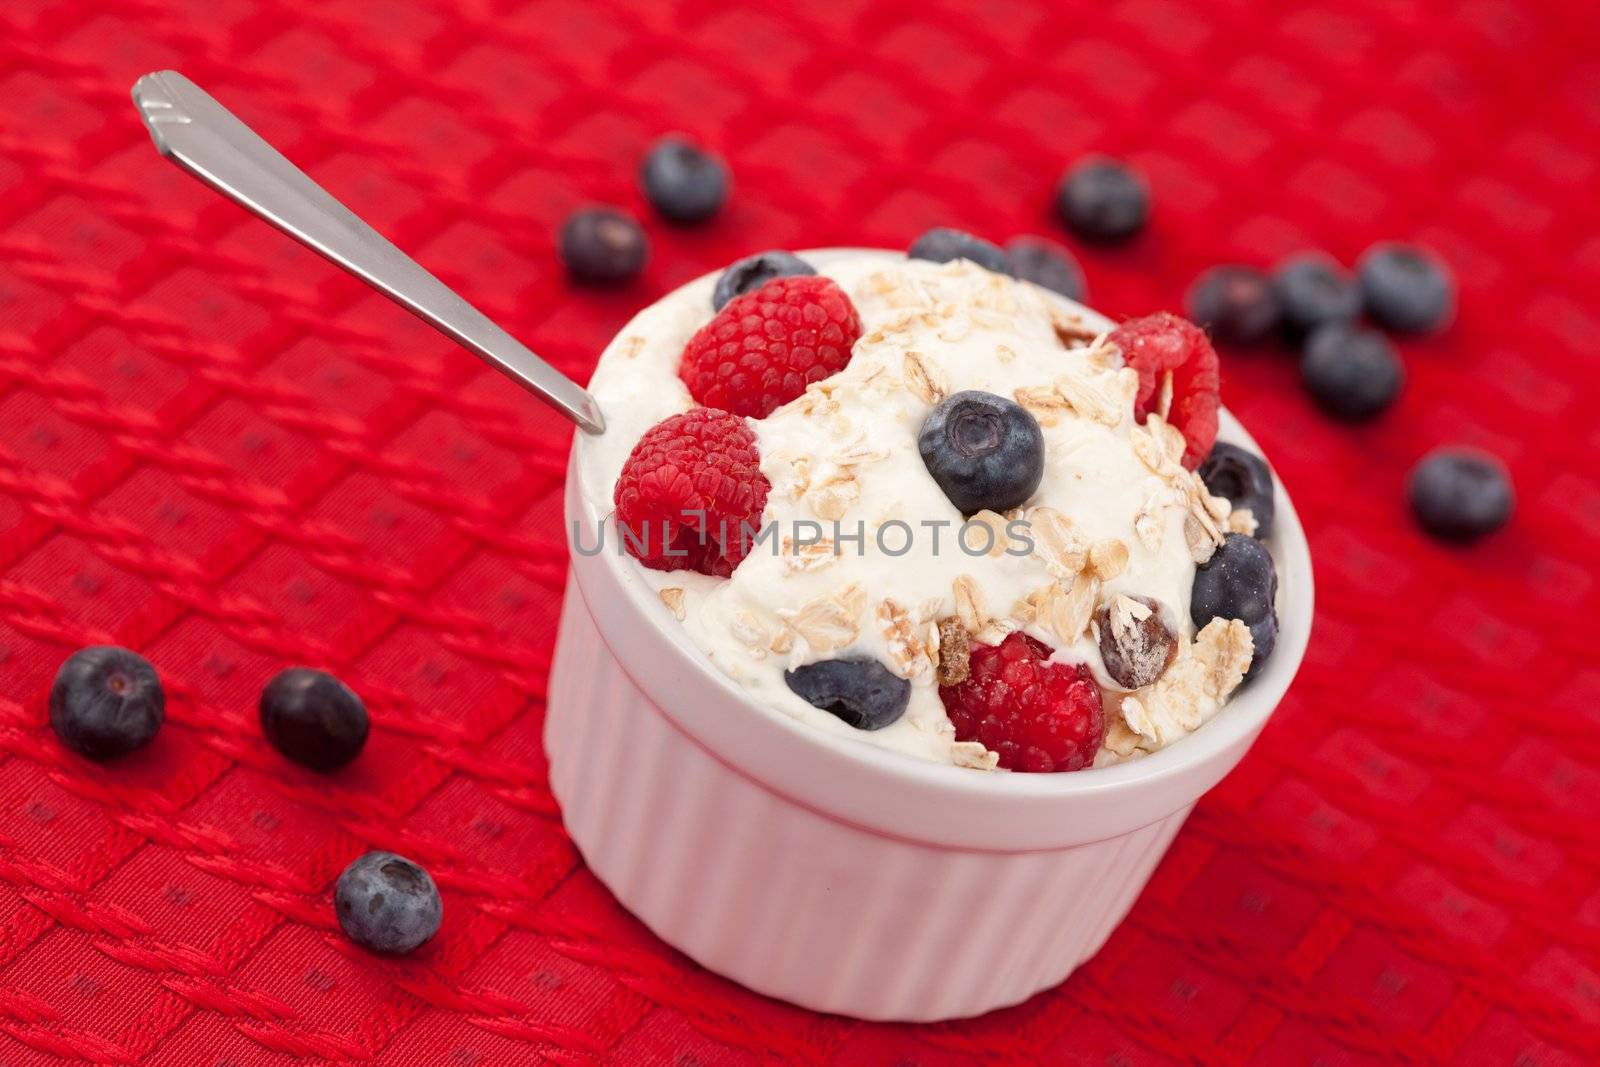 Pot of berries and whipped cream with spoon on the red carpet